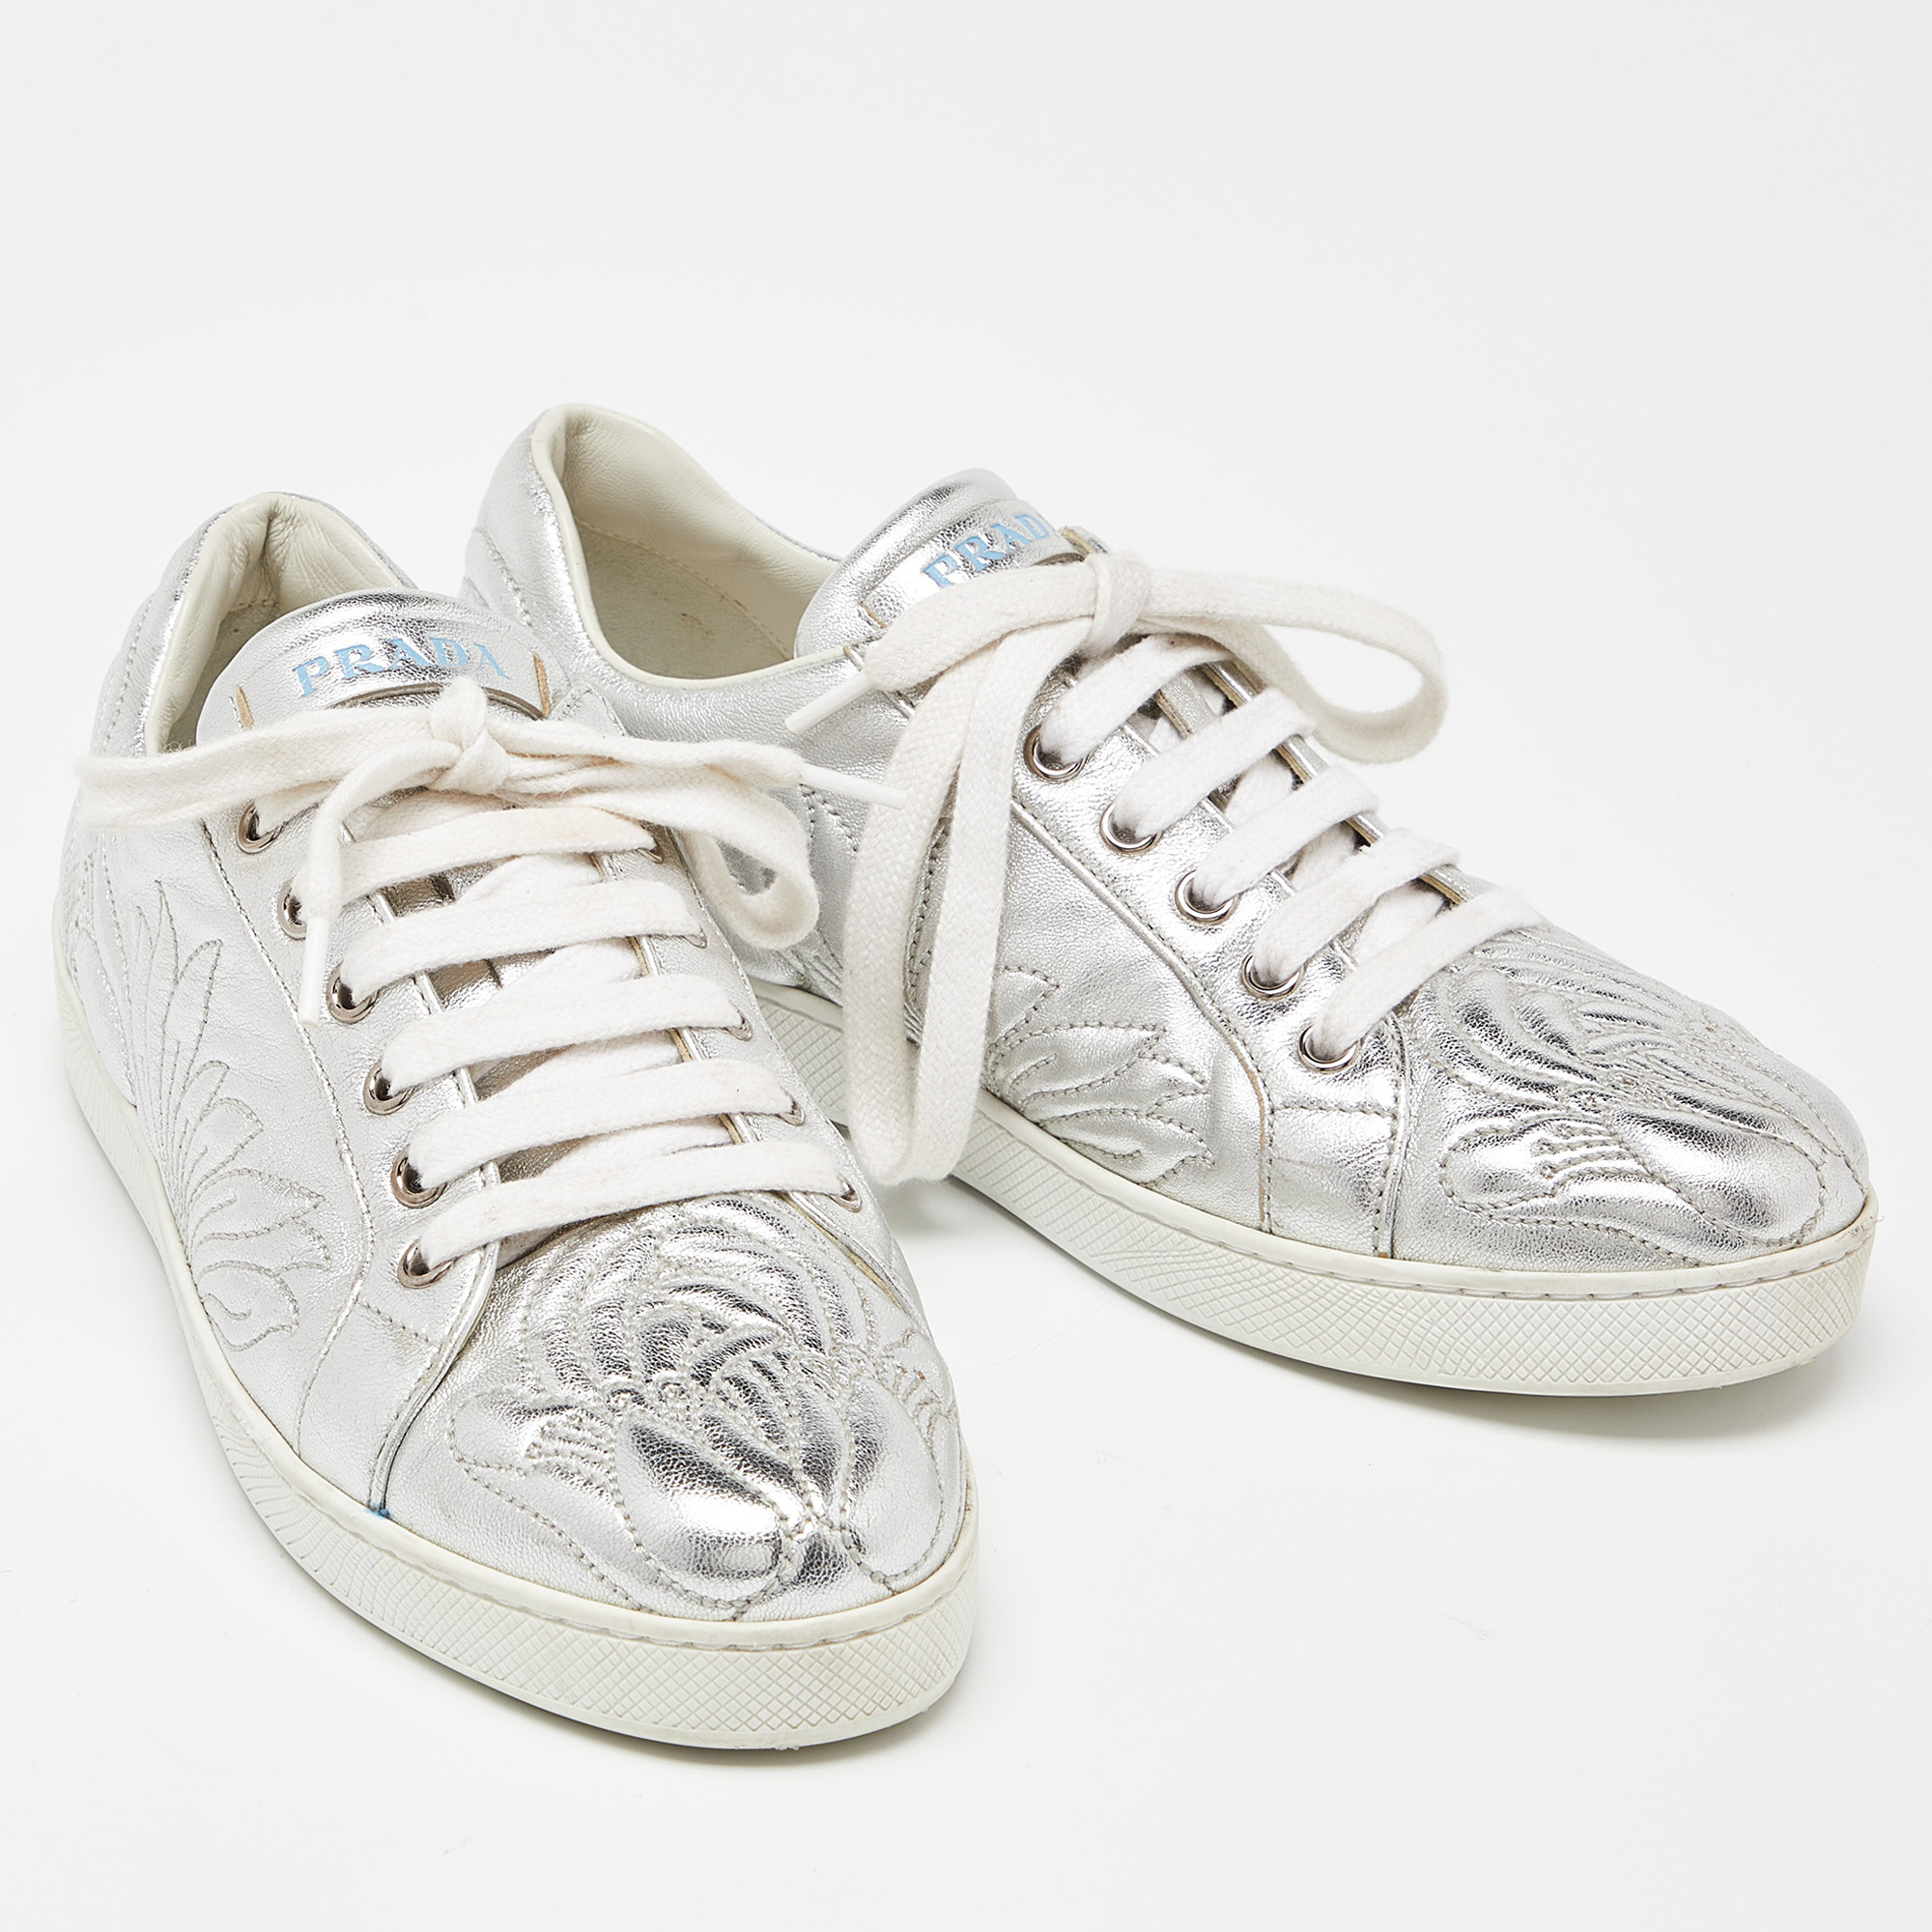 Prada Silver Embroidered Leather Low Top Sneakers Size 38